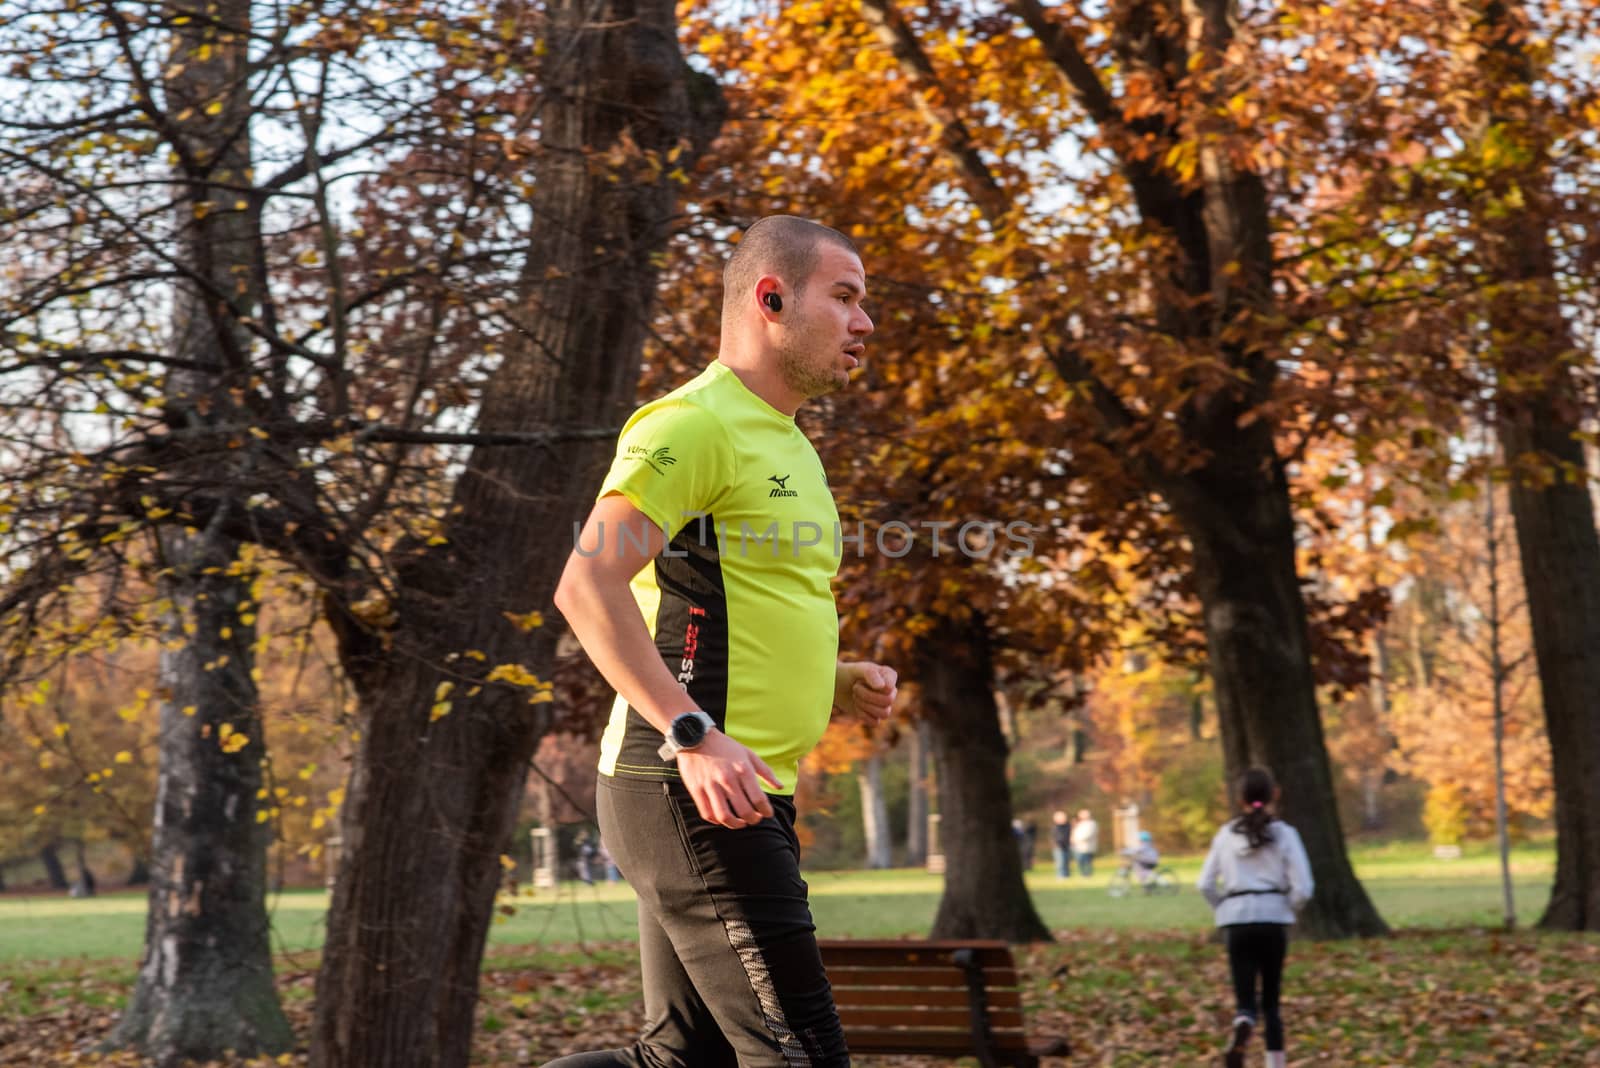 11/14/2020. Park Stromovka. Prague czech Republic. A man is running in the park on a Sunday winter day. by gonzalobell